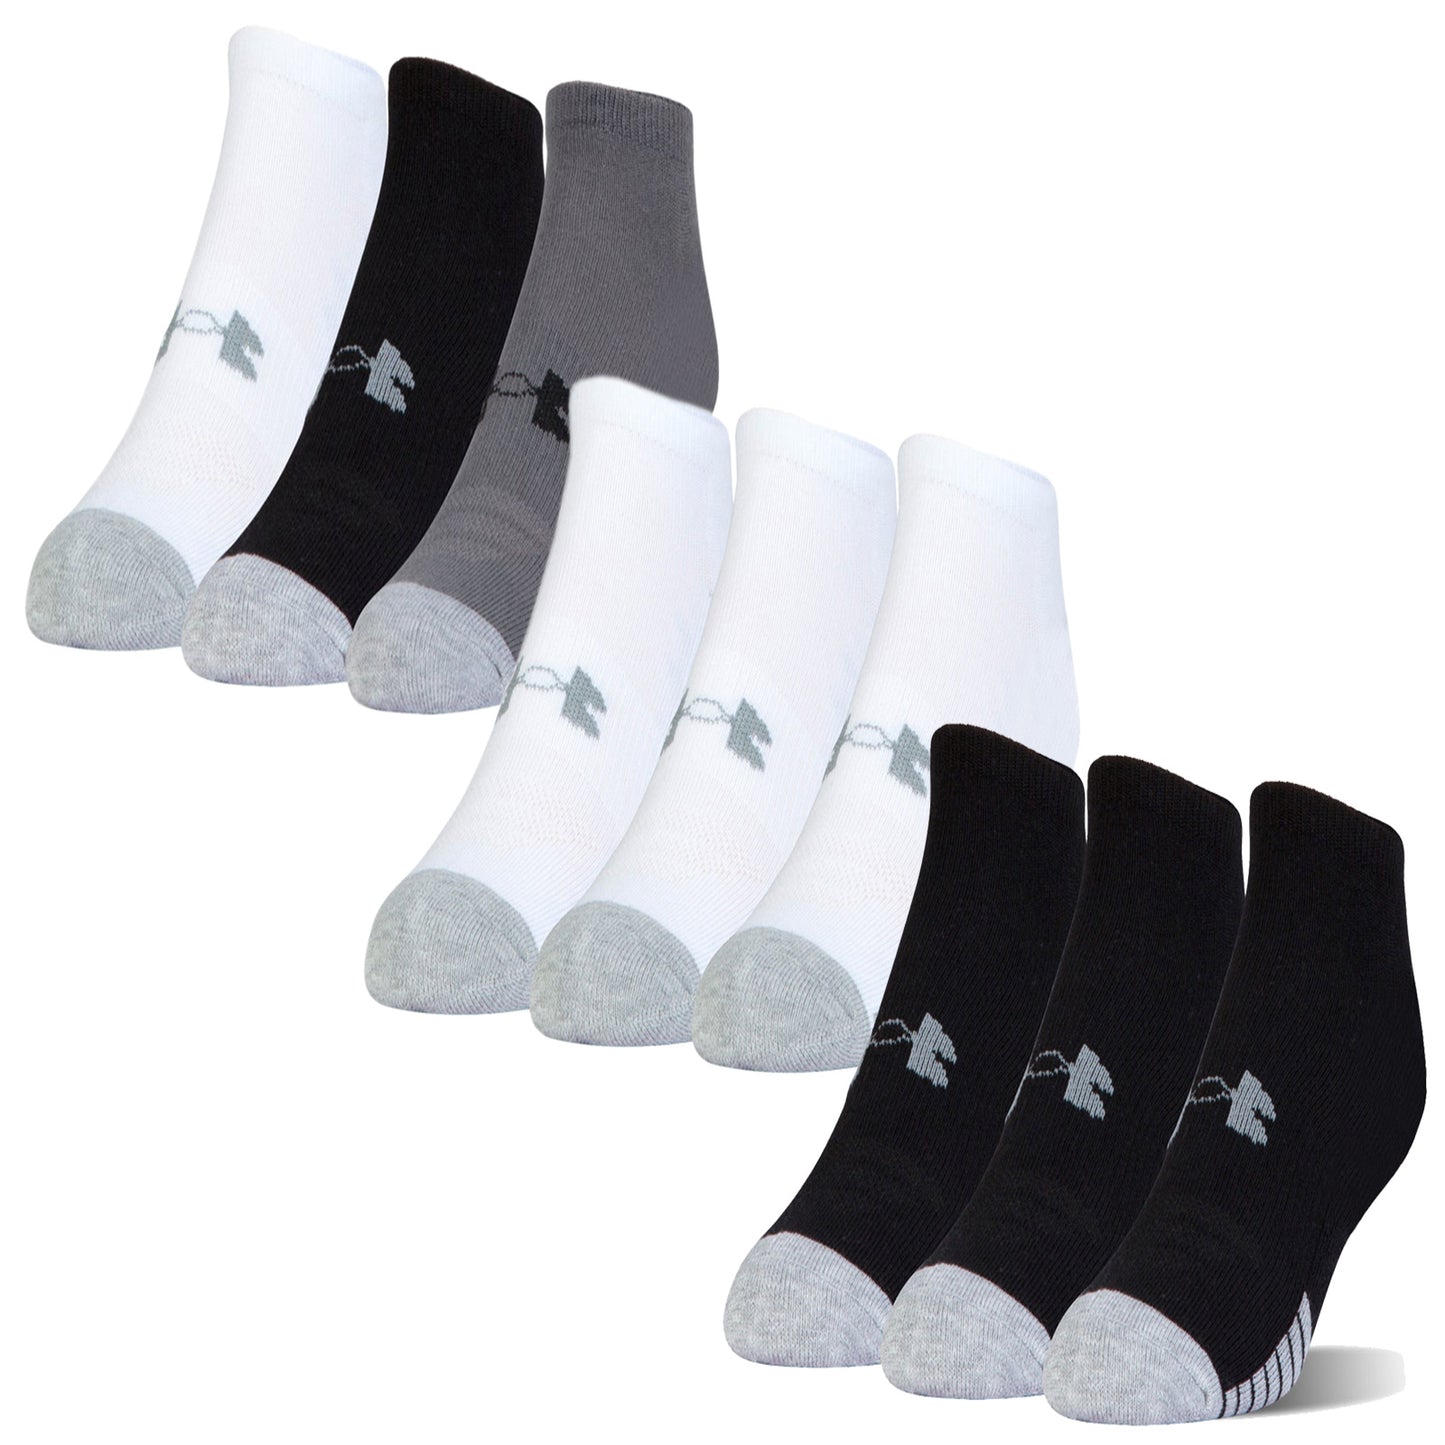 Under Armour Mens No Show Sports Socks (3 Pairs)